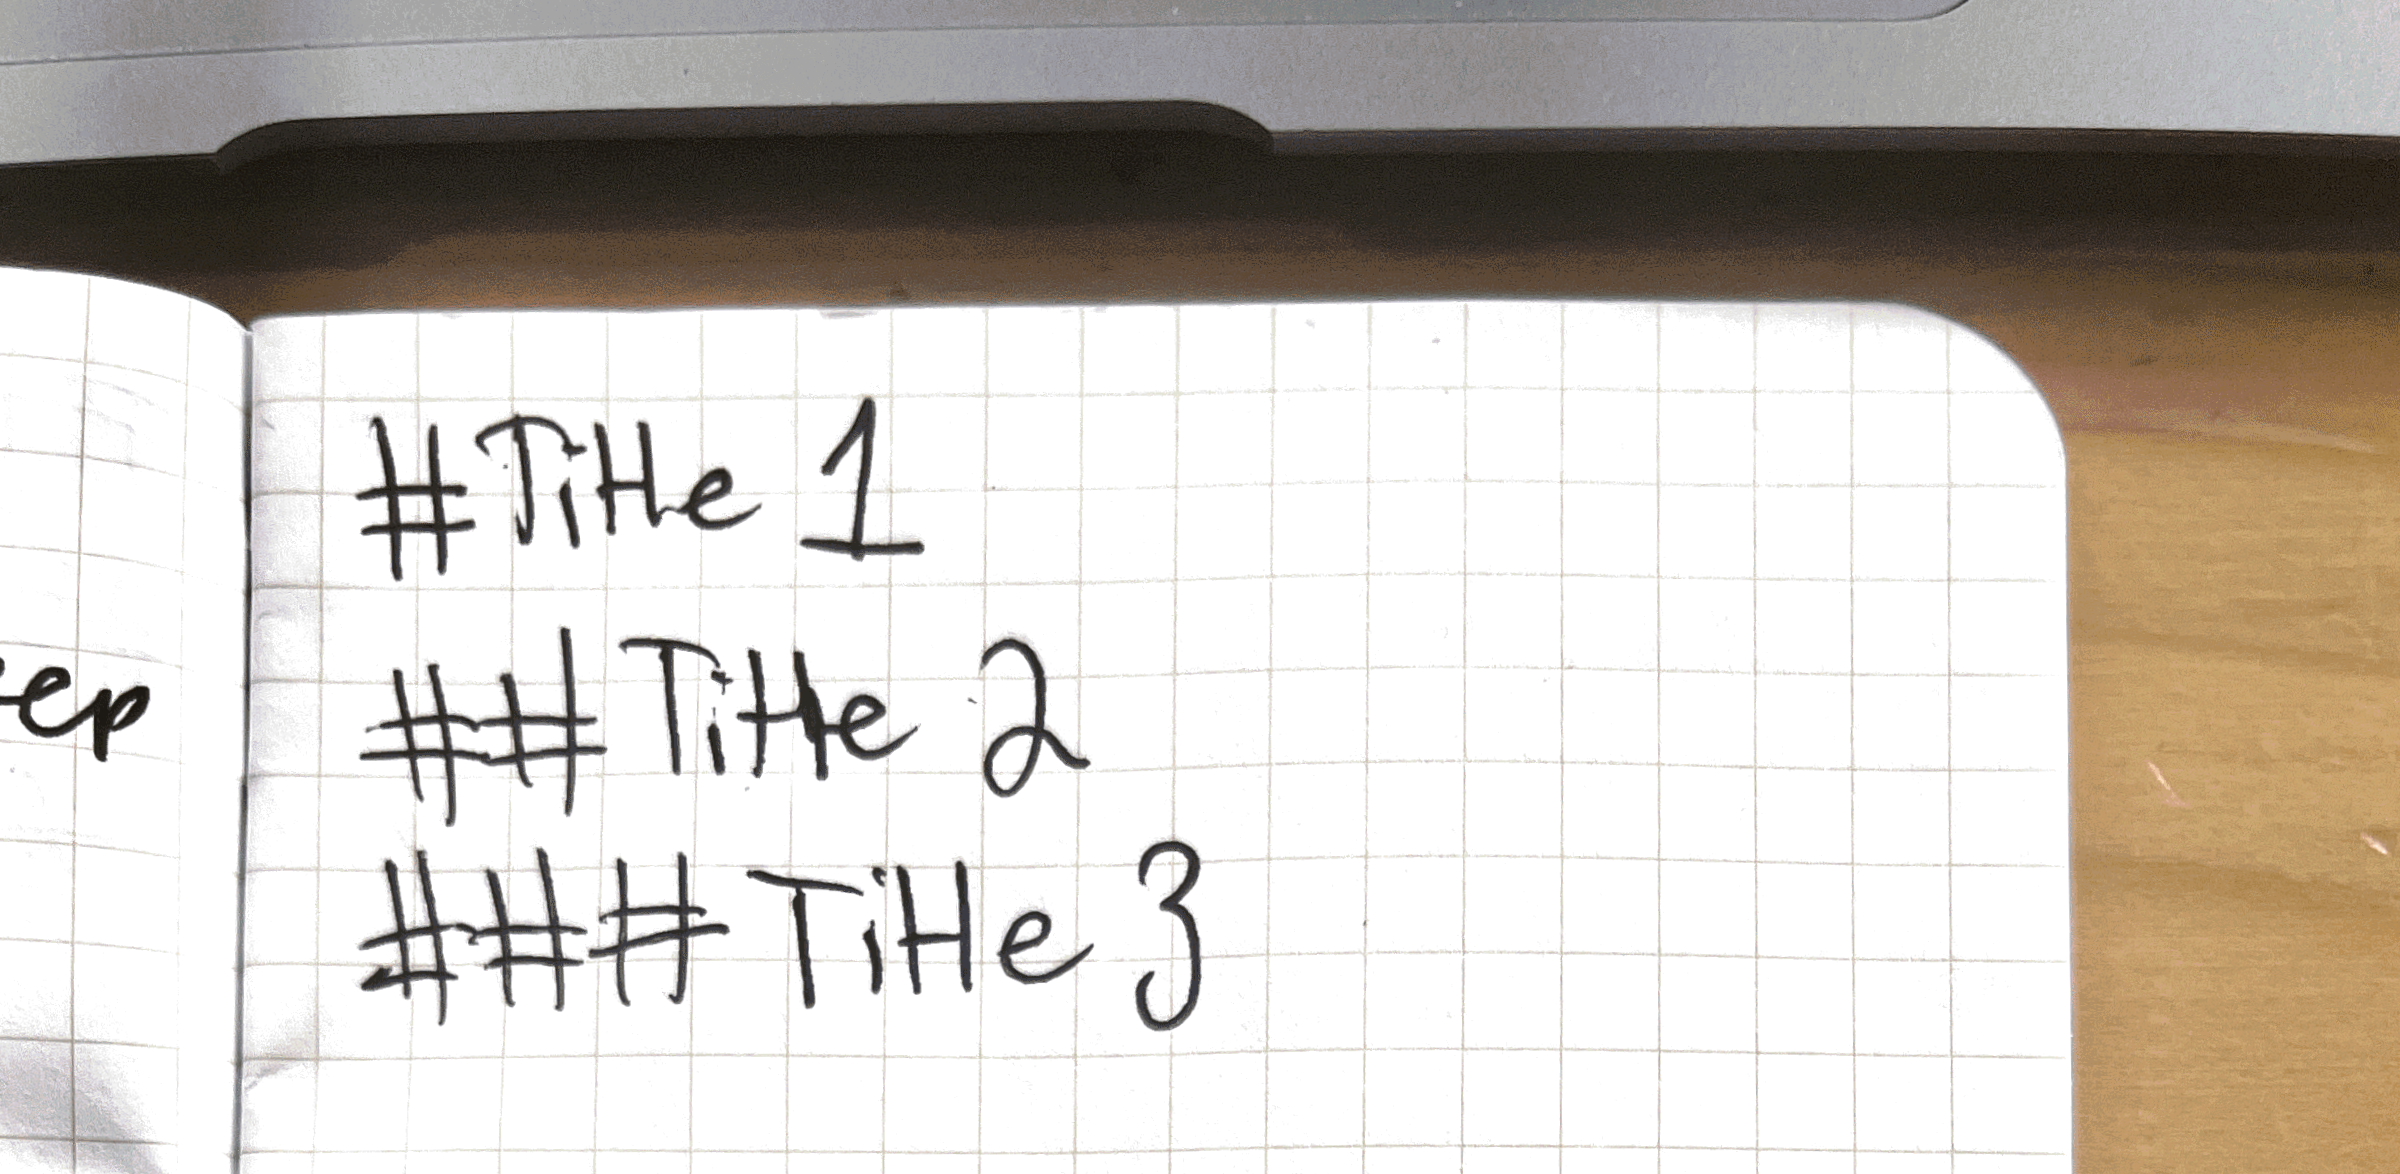 Close-up photo of a handwritten note on grid paper: #Title 1, ##Title 2, and ###Title 3 on seperate lines